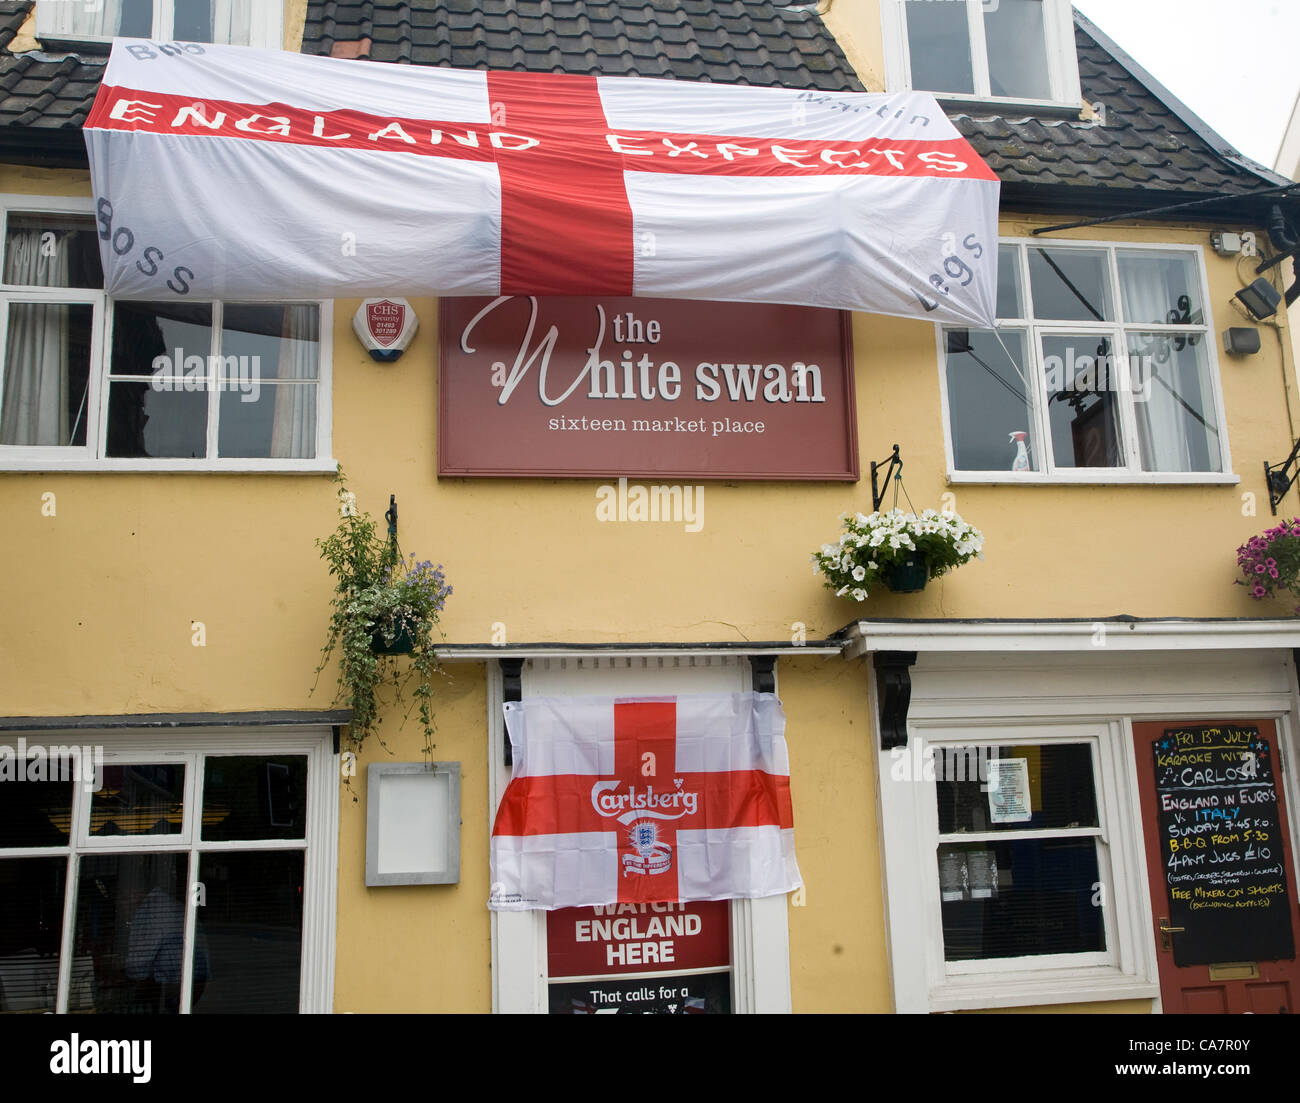 Bungay, Suffolk, UK. Saturday 23rd June 2012. 'England Expects' message on a huge St. George's flag is hung on The White Swan Stock Photo